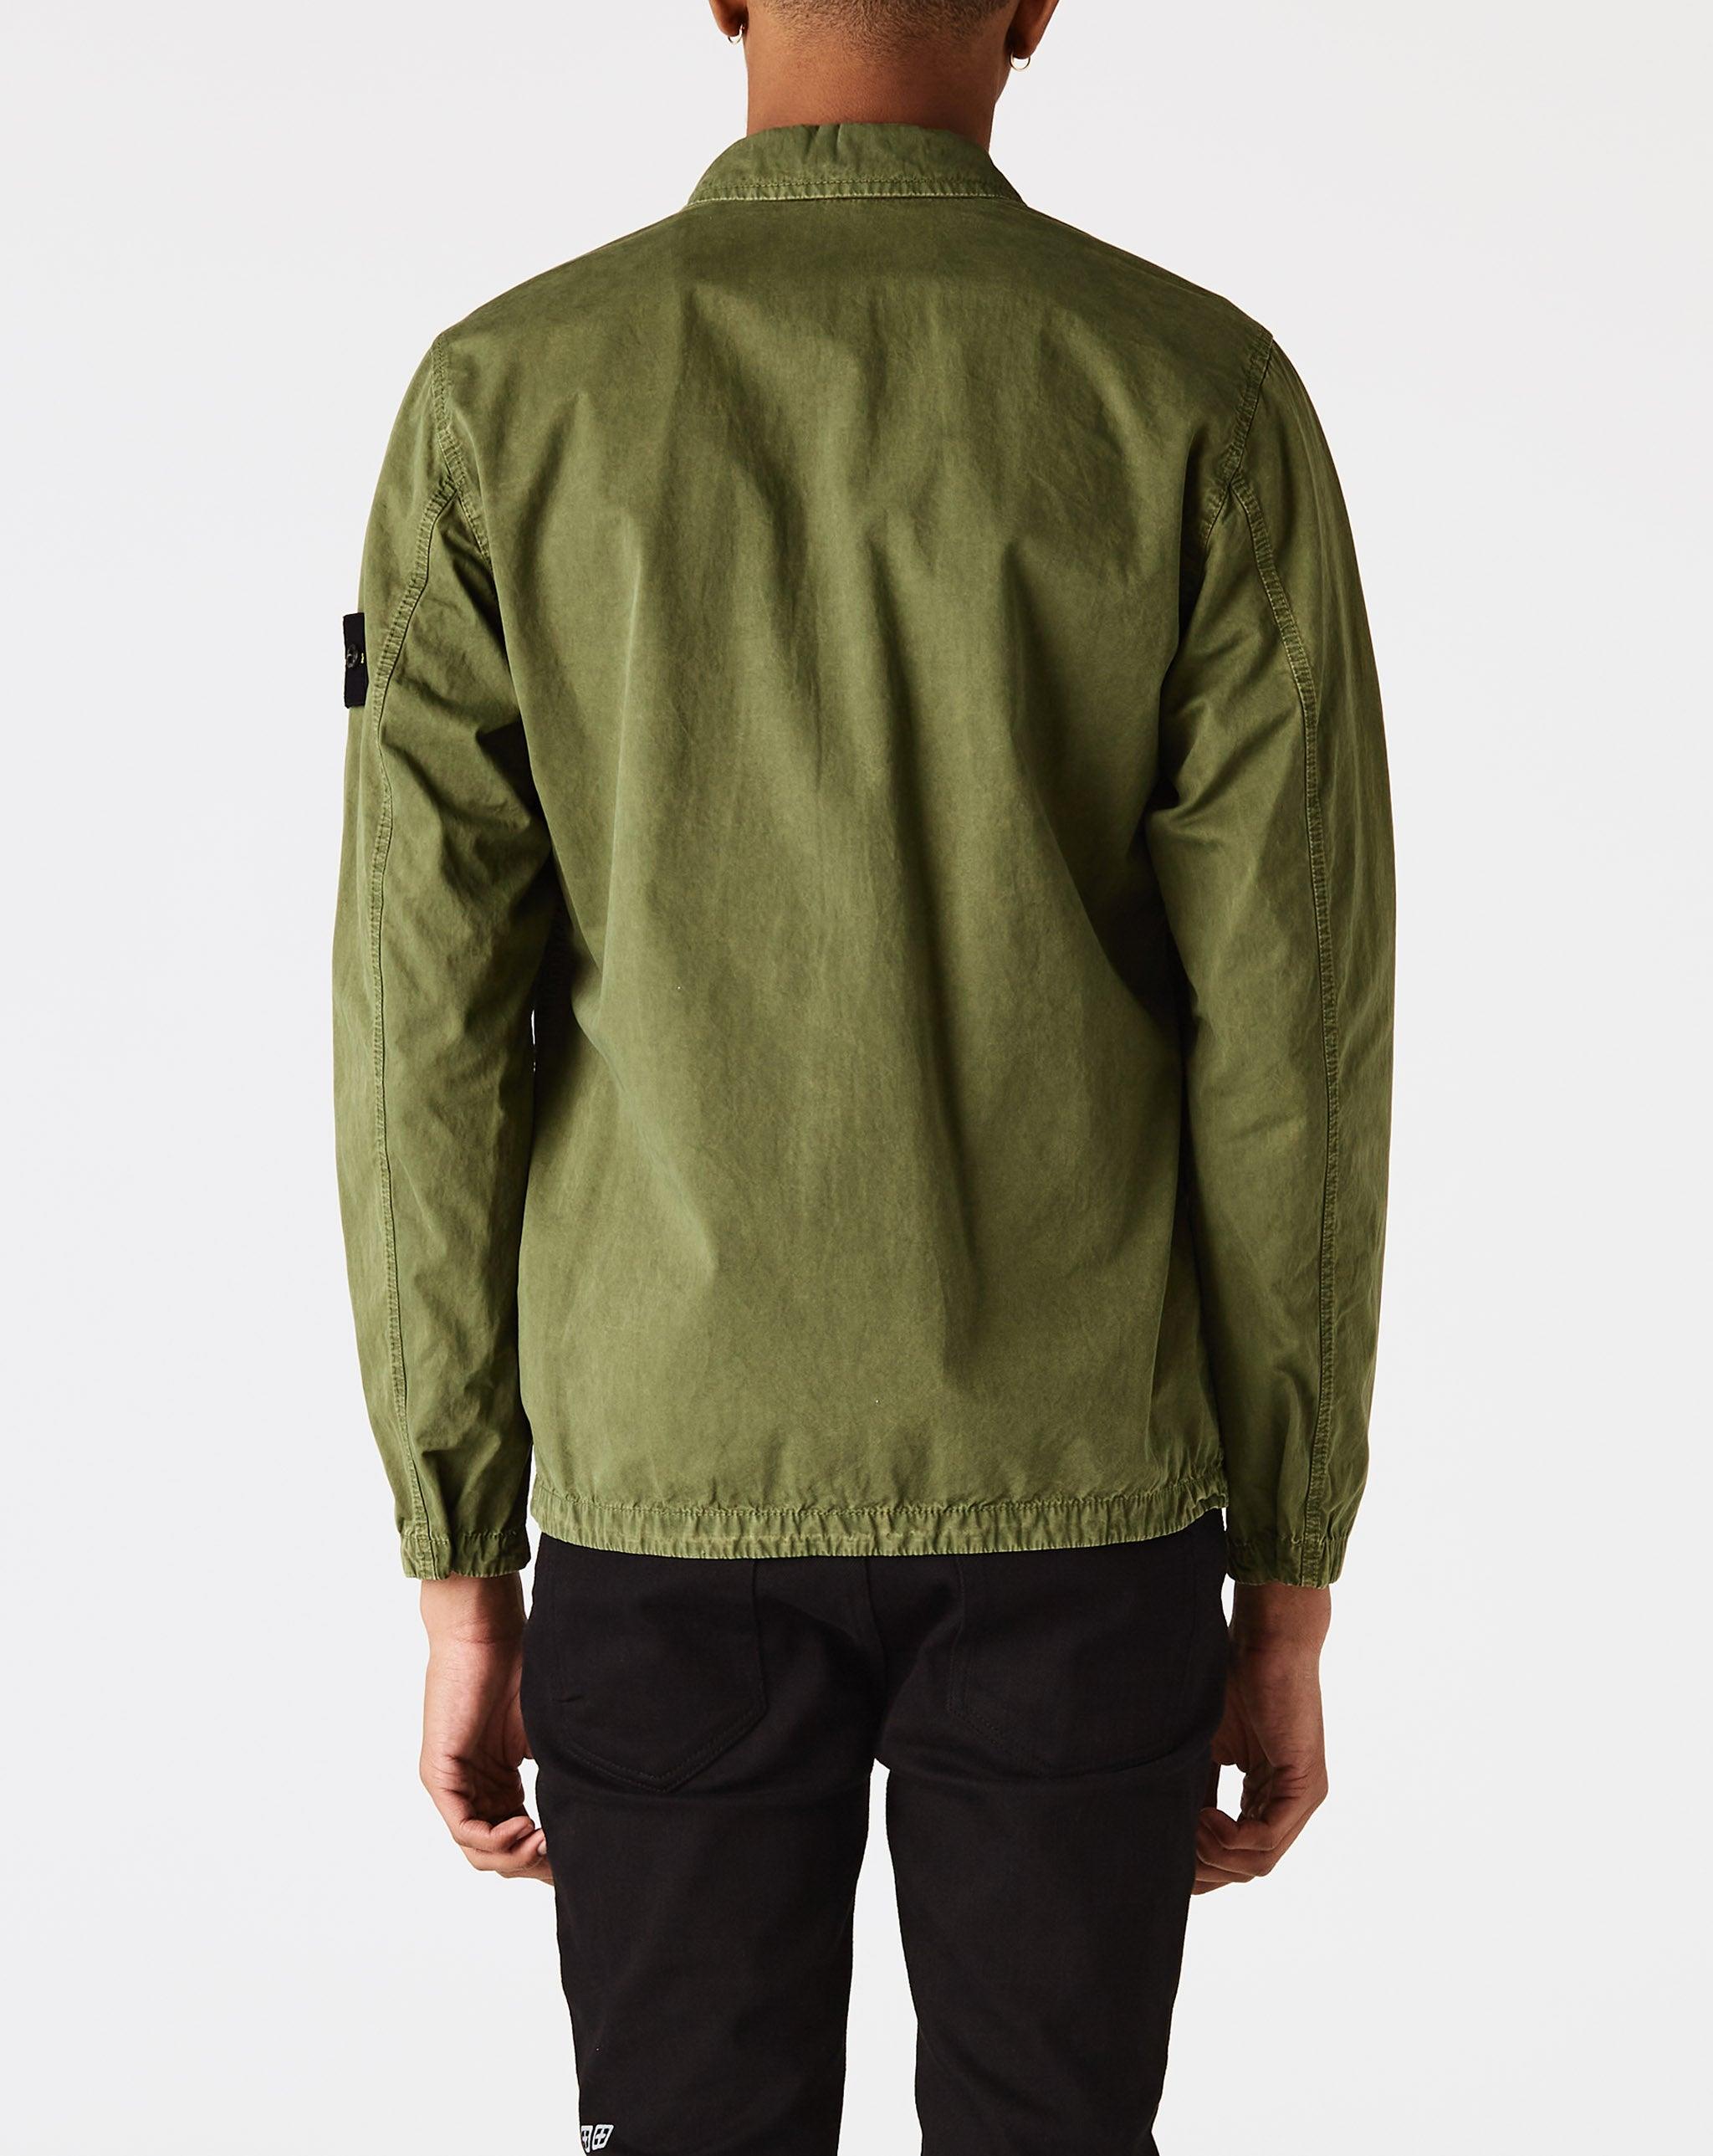 Stone Island Cotton Overshirt in Green for Men | Lyst